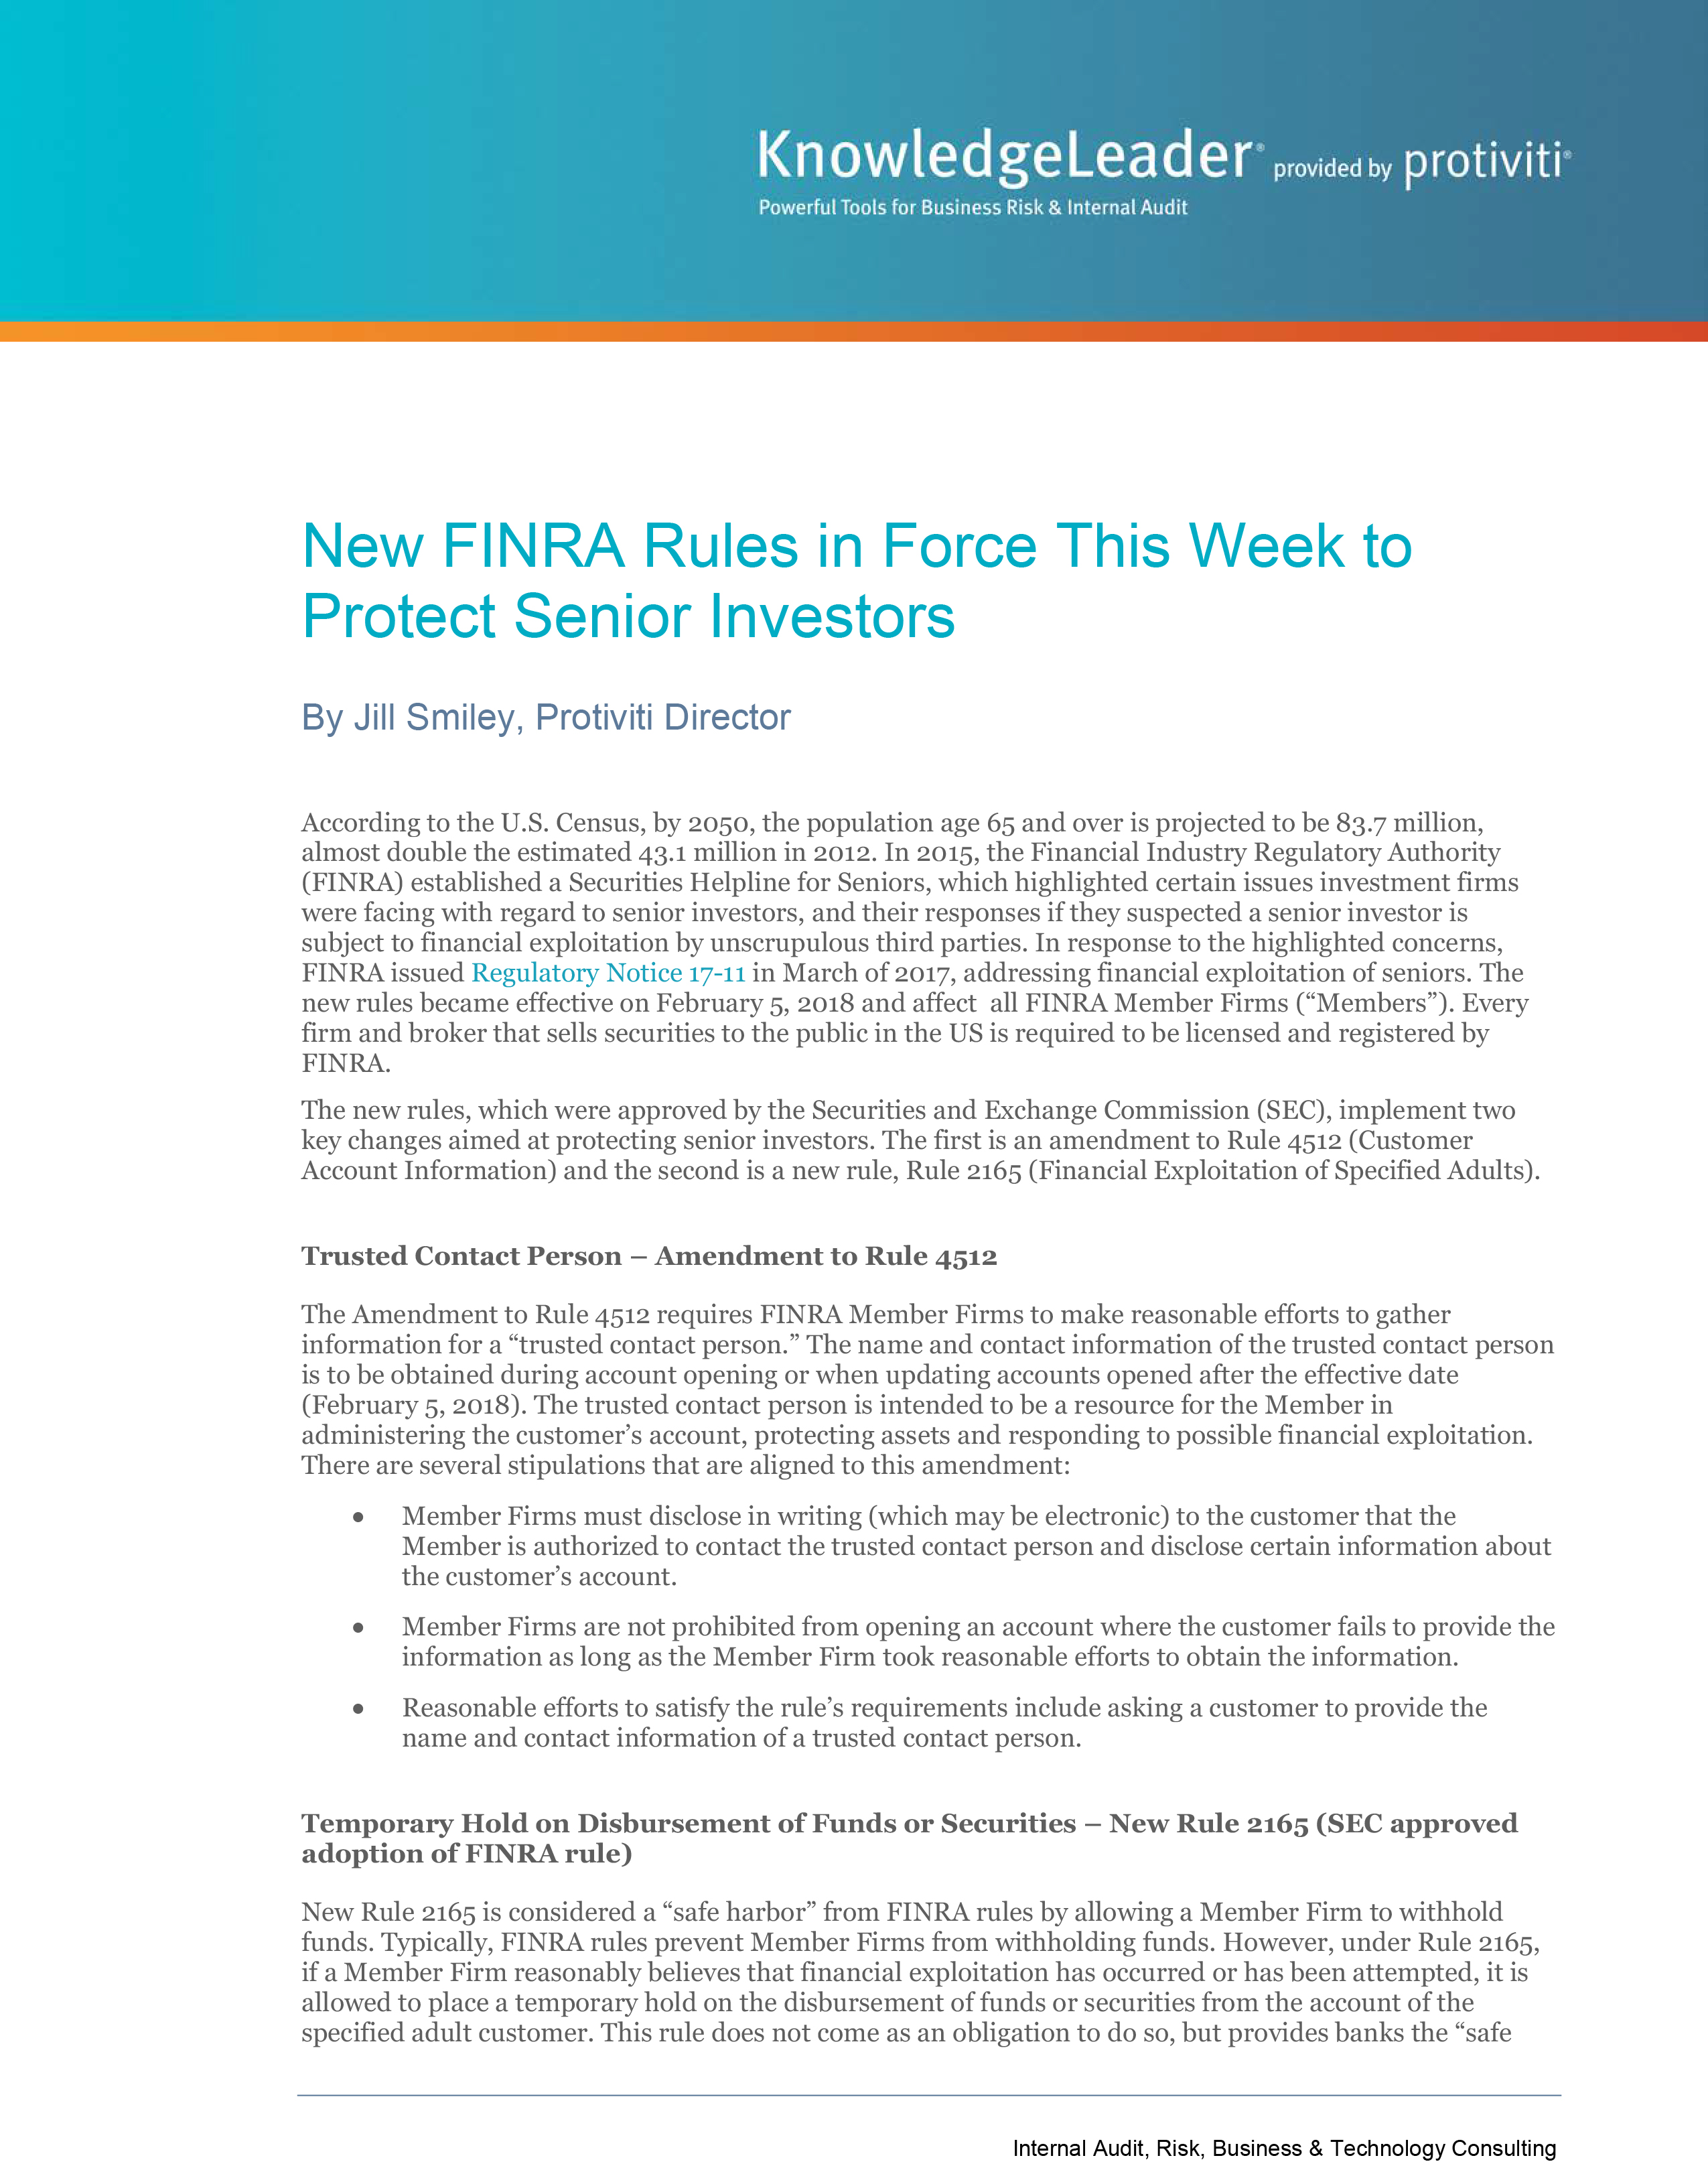 Screenshot of the first page of New FINRA Rules in Force This Week to Protect Senior Investors